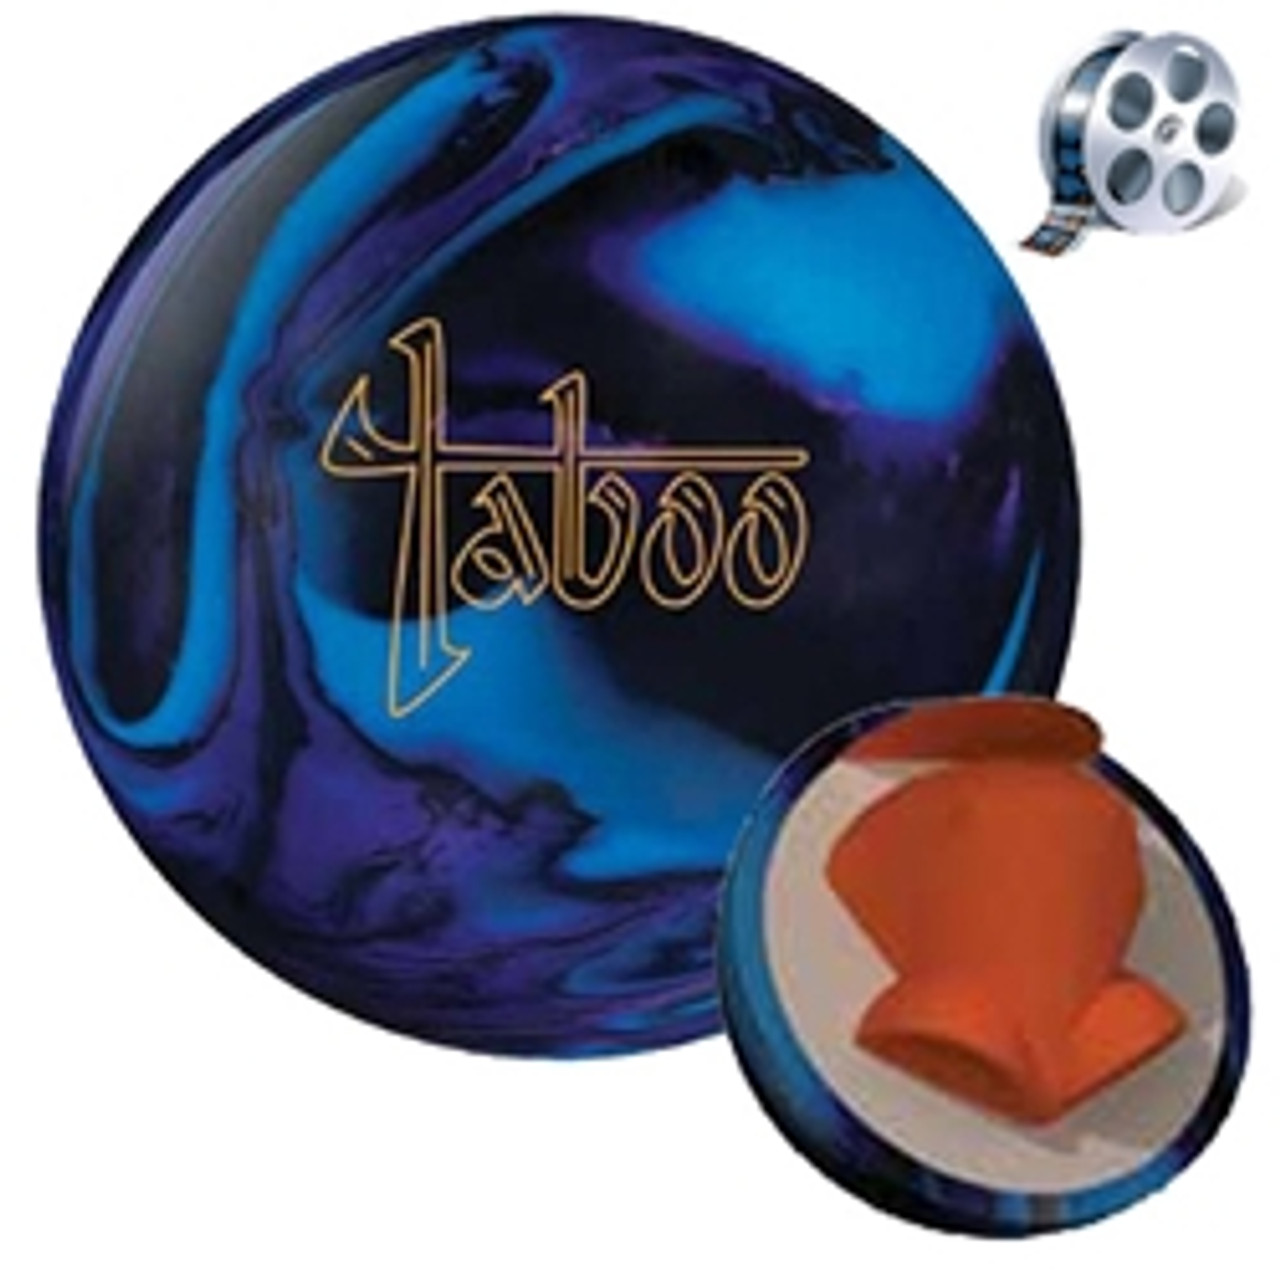 Hammer Taboo Bowling Ball: Strike with Power!